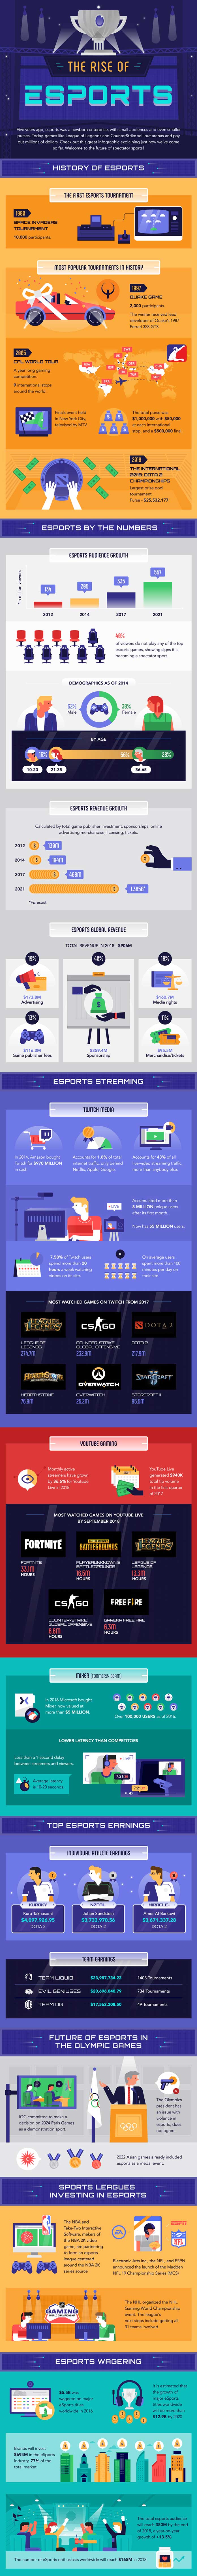 Esports made a successful debut at the 2018 Asian games and appearance at the Olympics is most likely. (Infographics: NJgames)